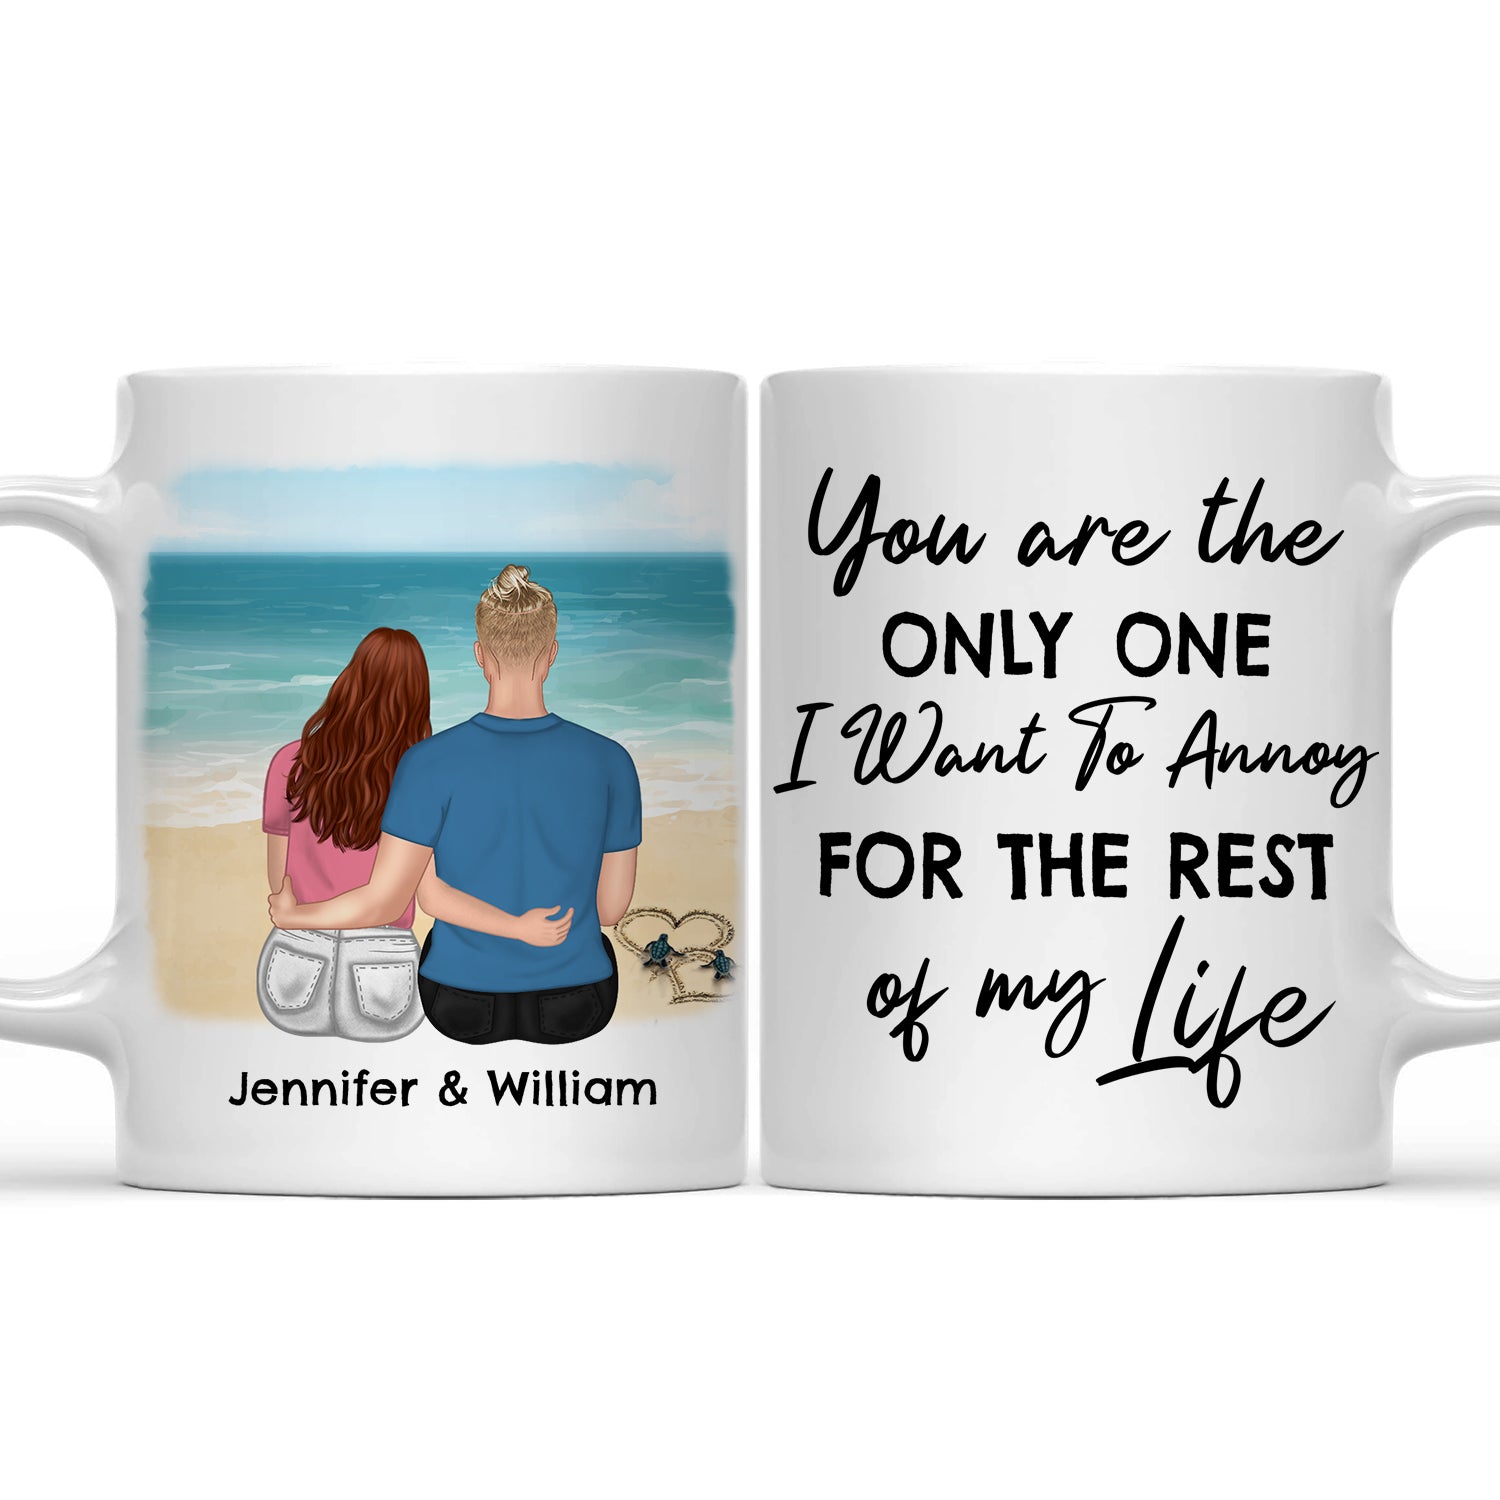 You're Stuck With Me - Gift For Couples - Personalized Mug